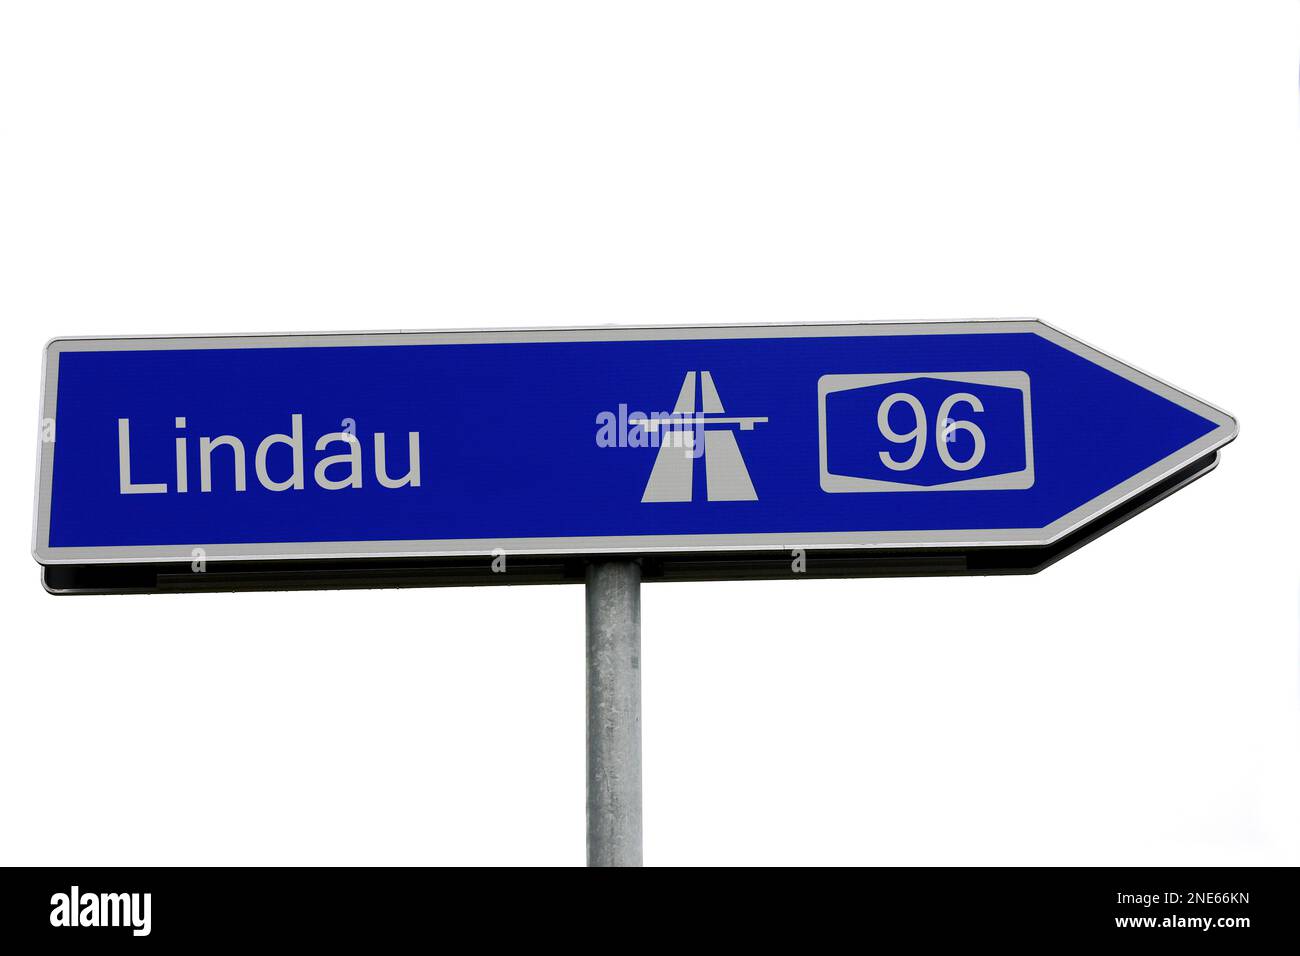 Signpost to the A96 motorway towards Lindau, Germany Stock Photo